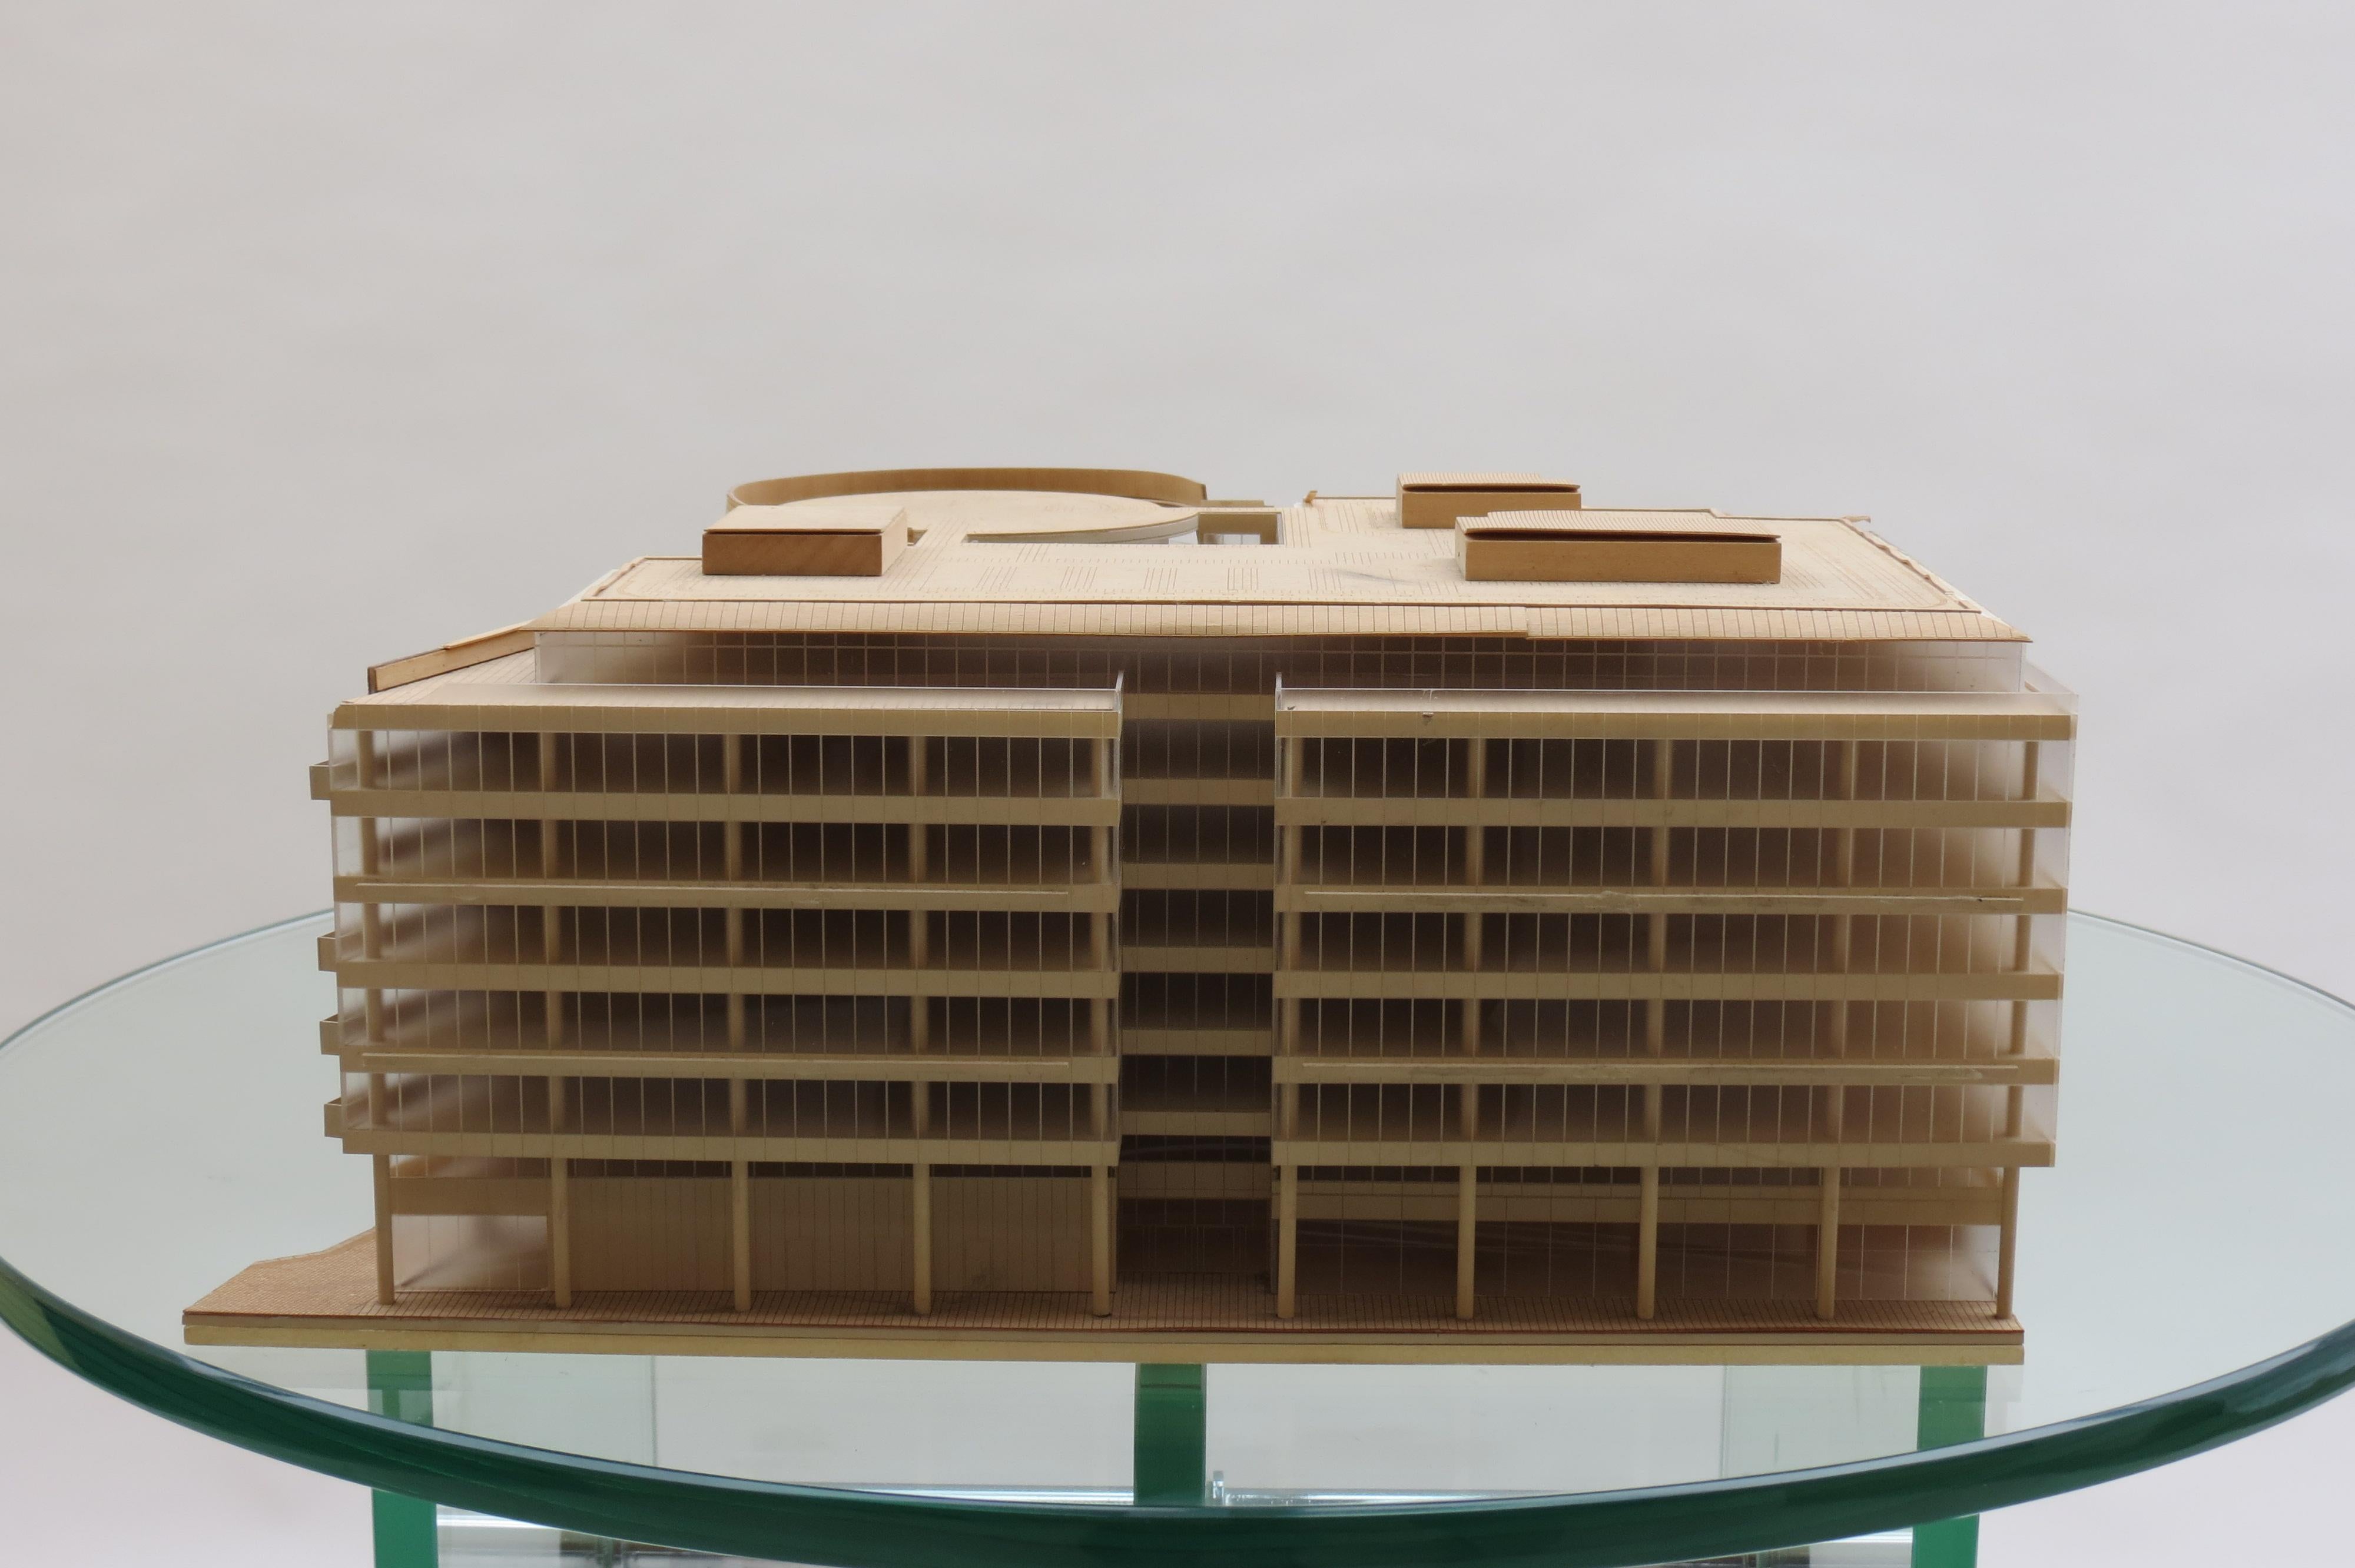 1970s Plywood and perspex Modernist Architect's Model

A wonderfully detailed Architect's model of a building.  Hand made using plywood and perspex. Dates from the 1970s, modernist design.

Small amount of loss to the model, as shown in